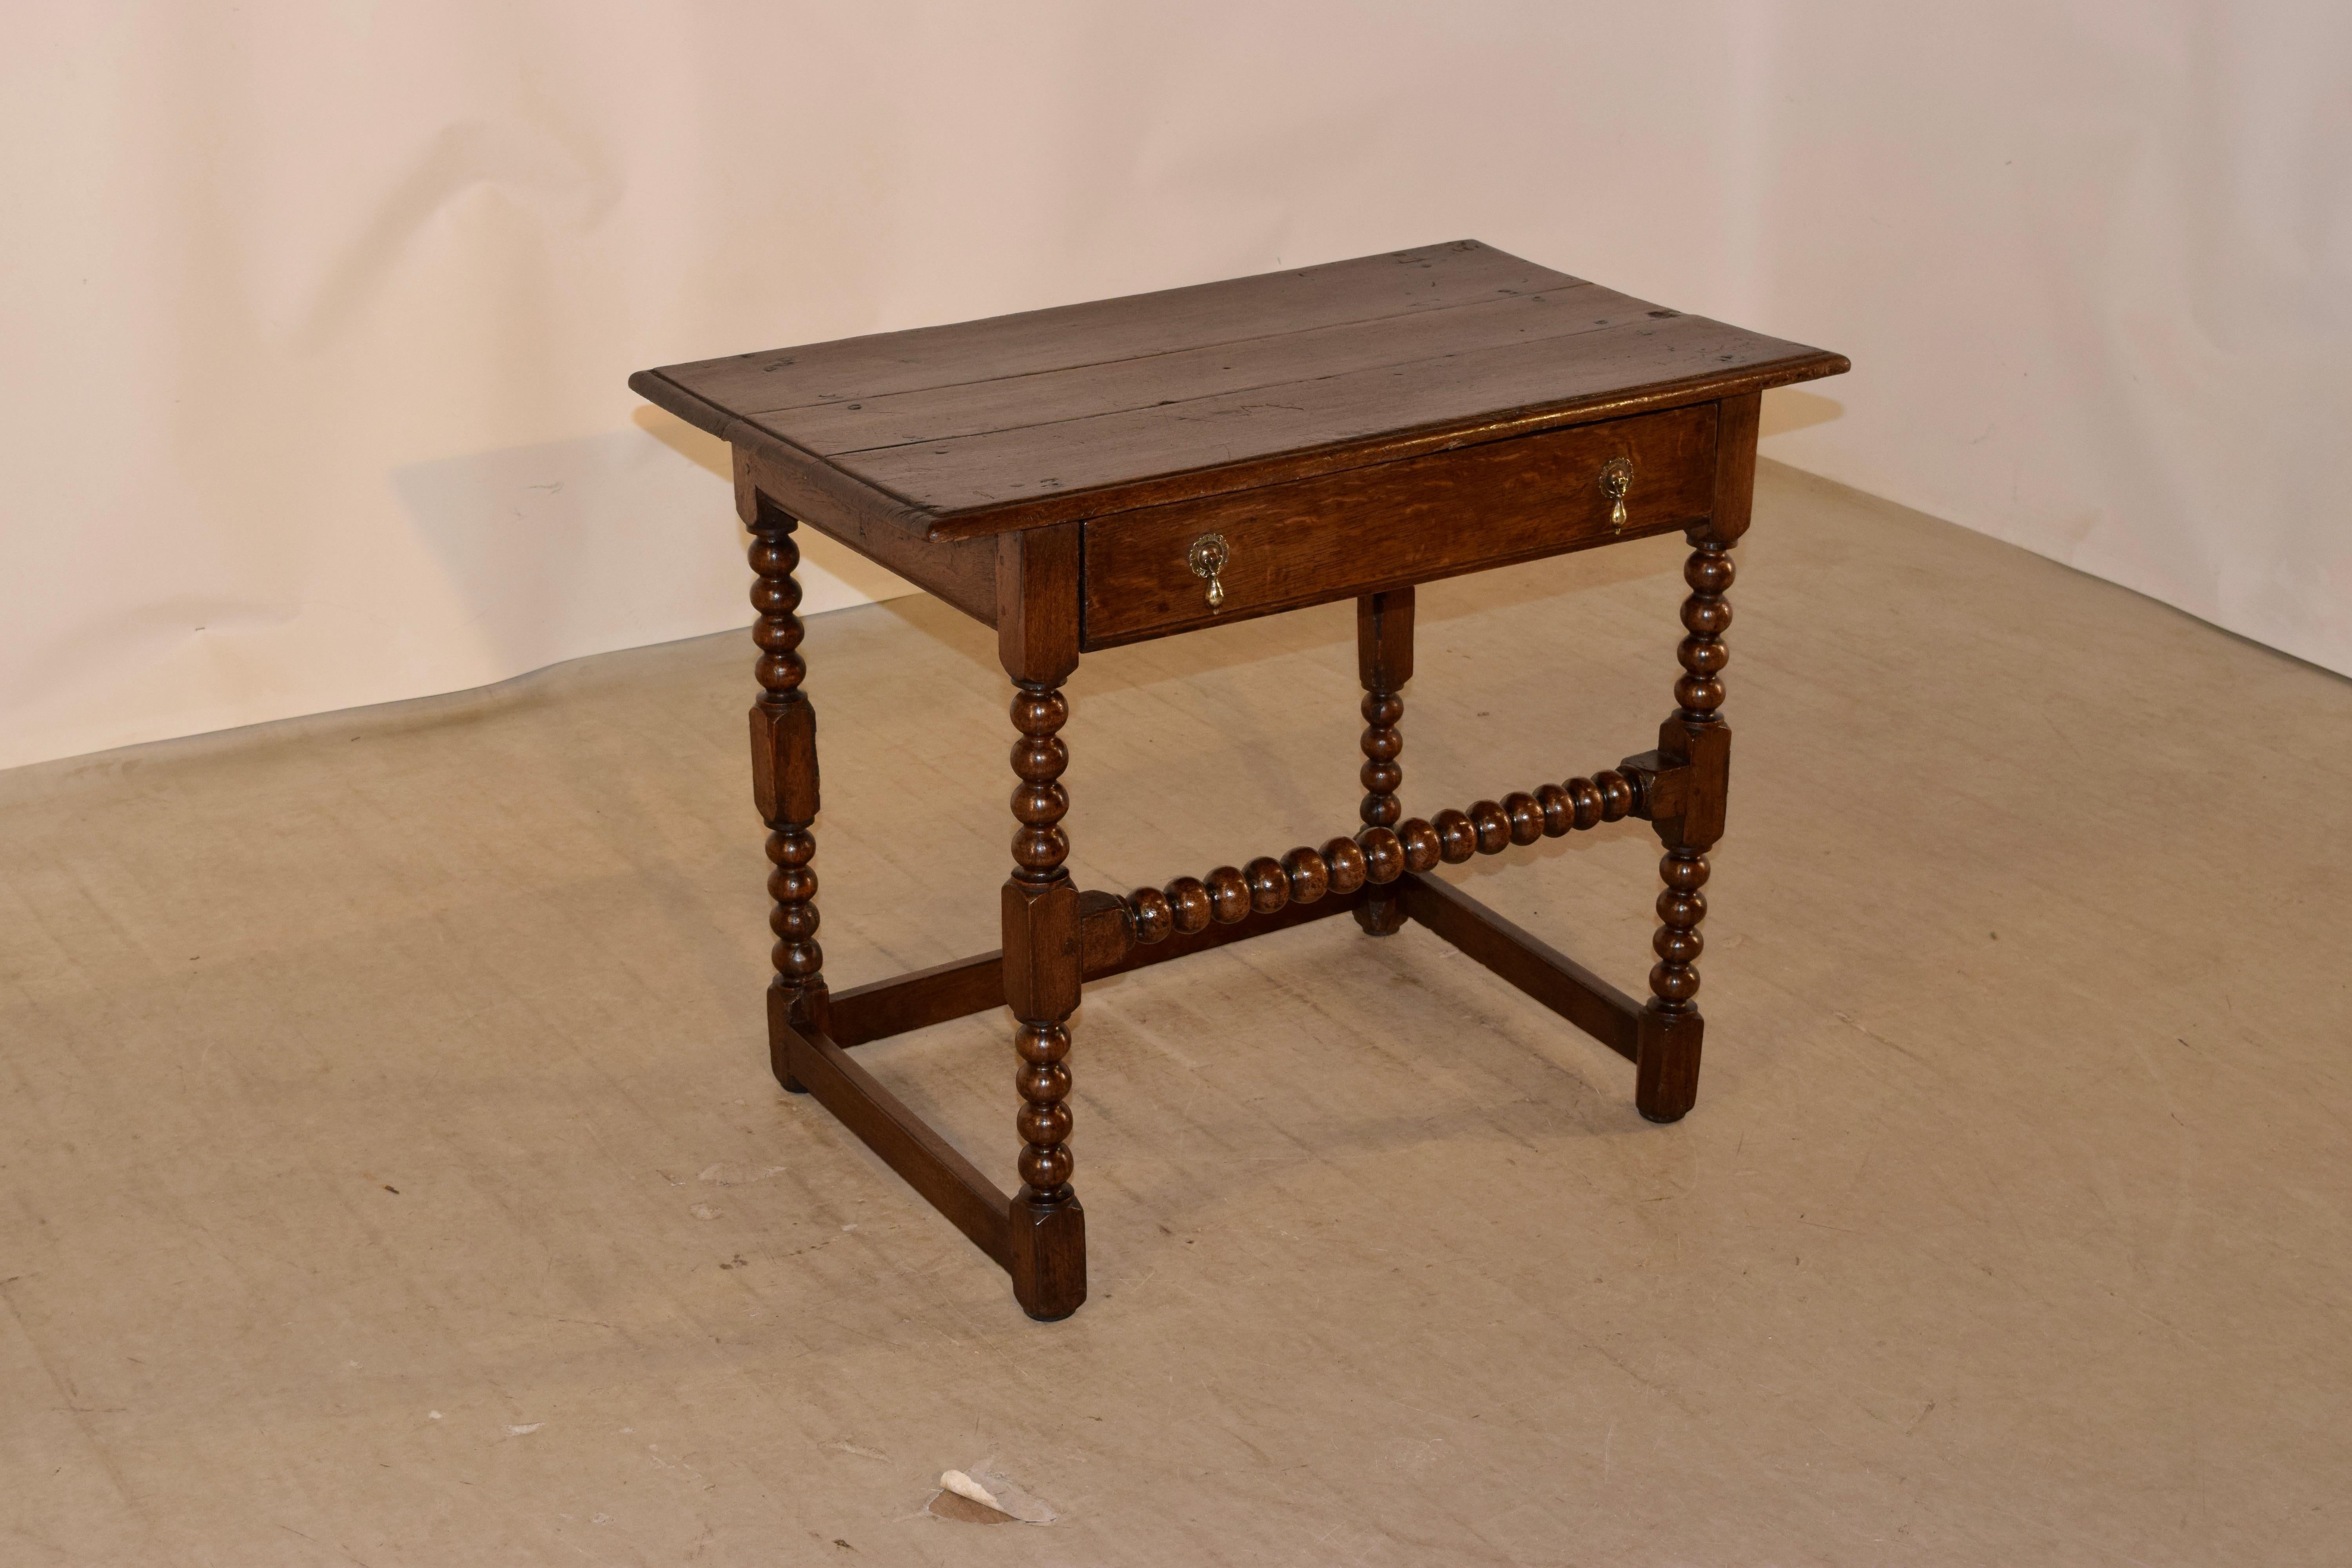 17th century oak side table from England with a beveled edge around the top, which has hand pegged construction. The apron is simple and contains a single drawer over hand turned bobbin legs, joined by a matching stretcher in the front, and simple